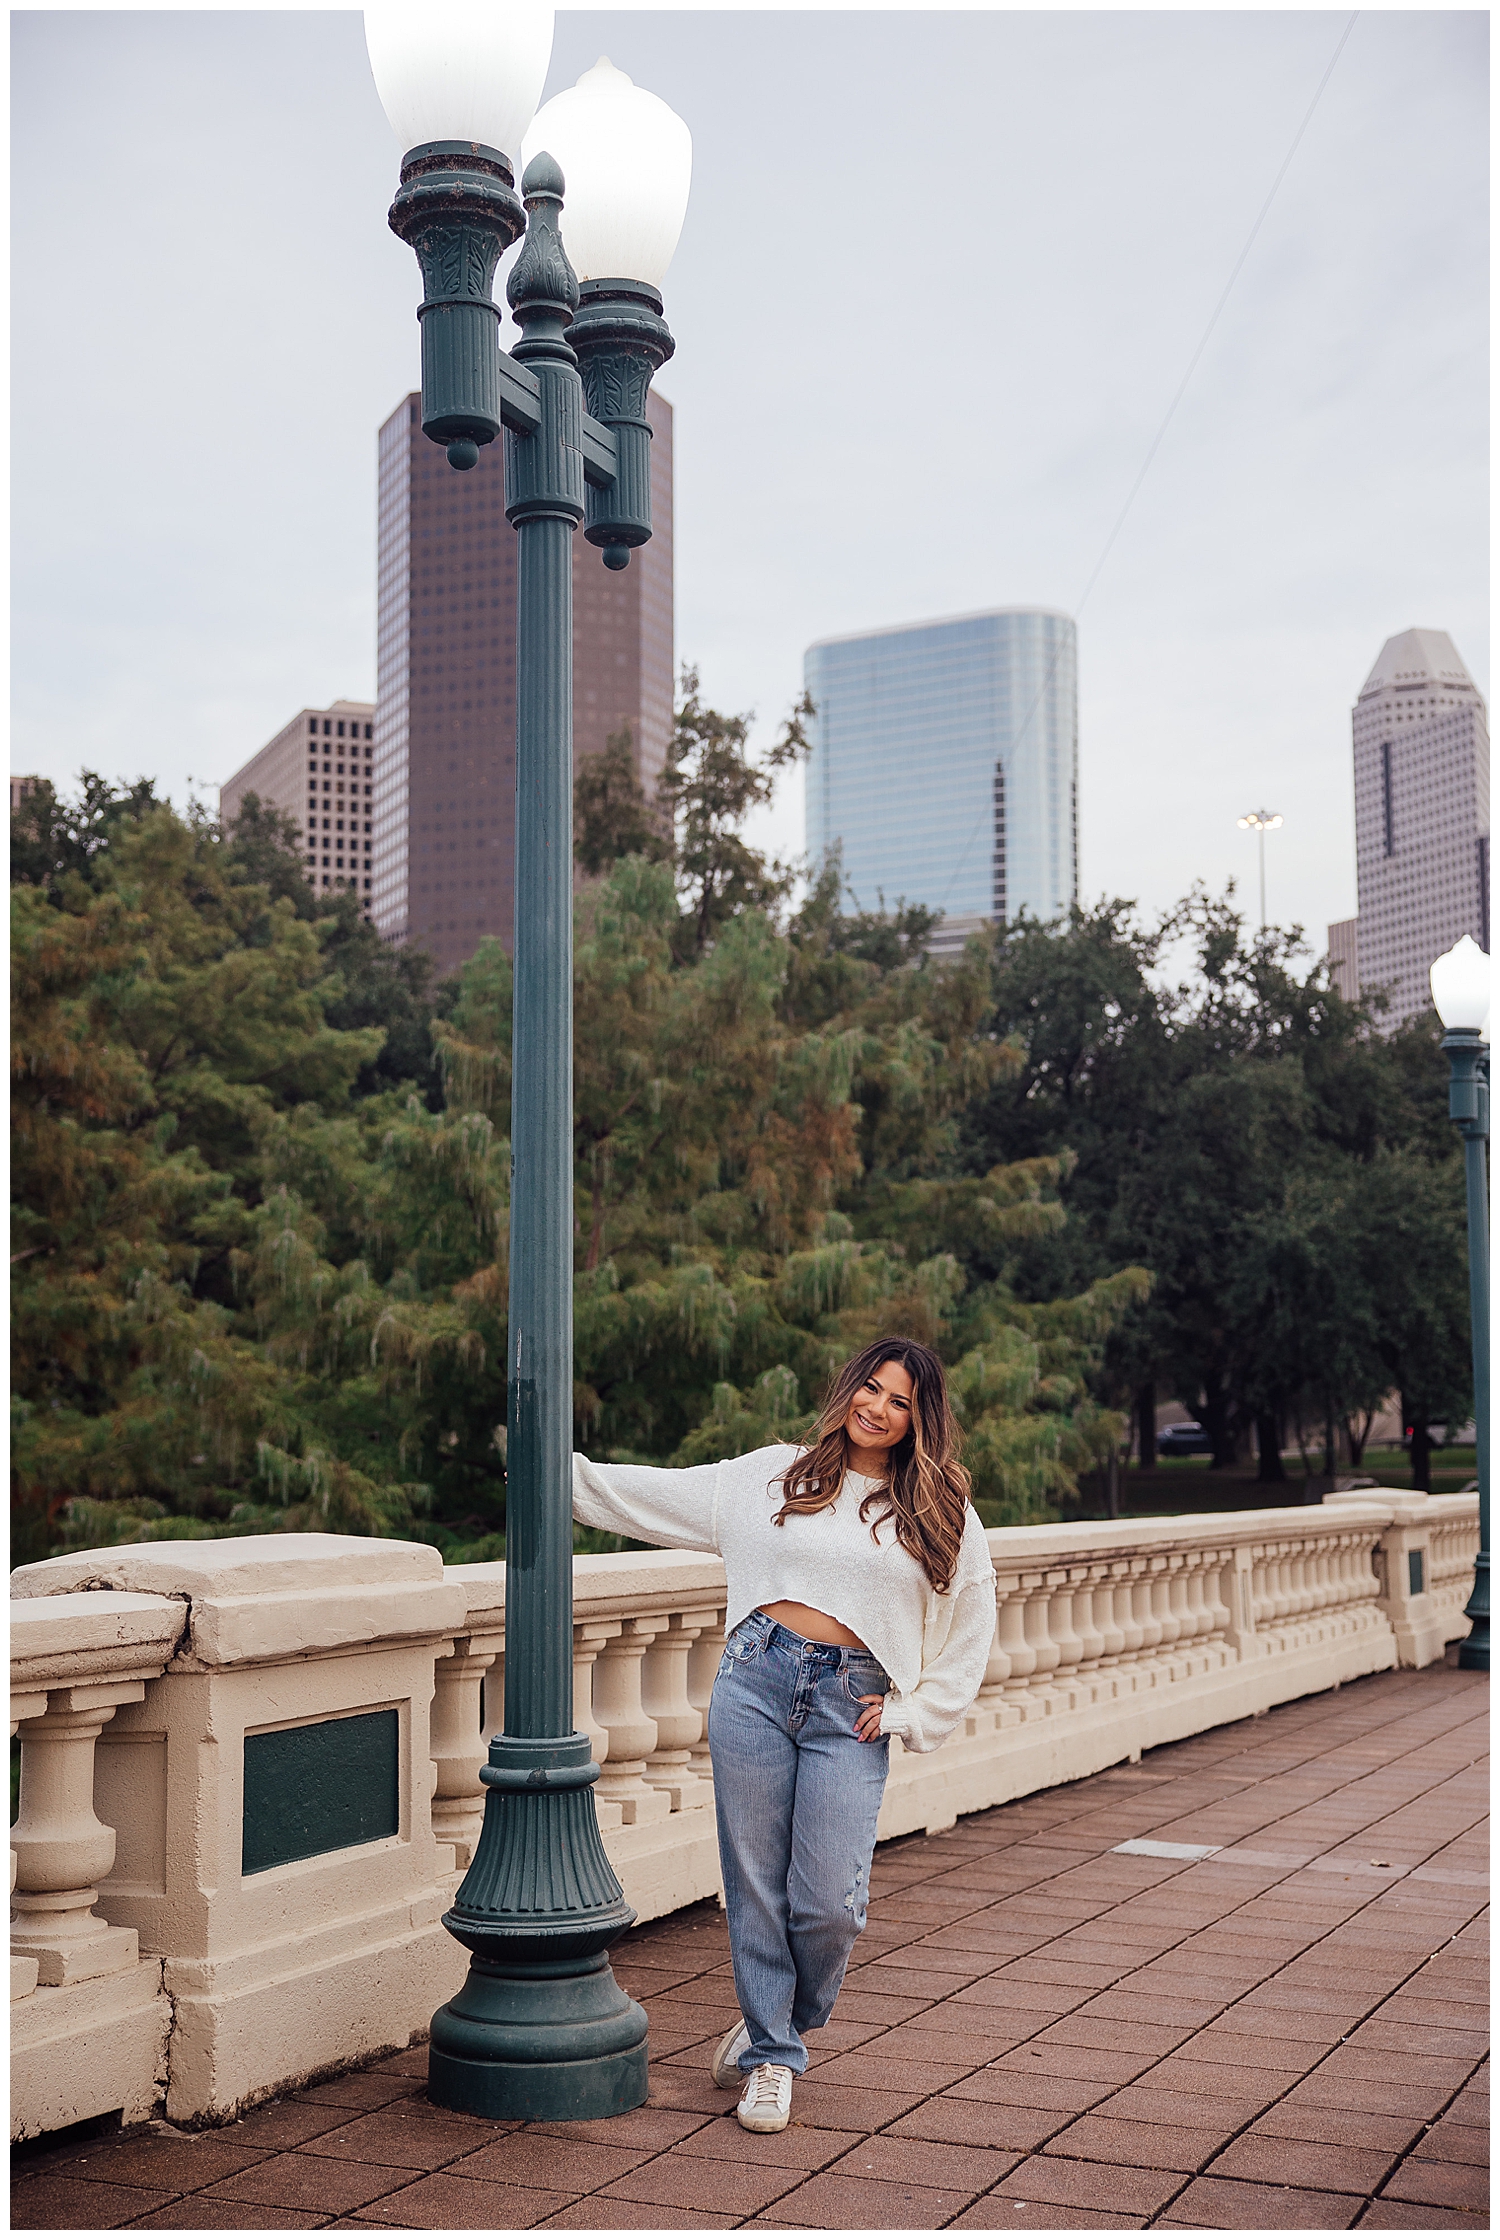 Houston senior photography session Sabine street bridge with girl in white shirt and jeans hanging off lamppost